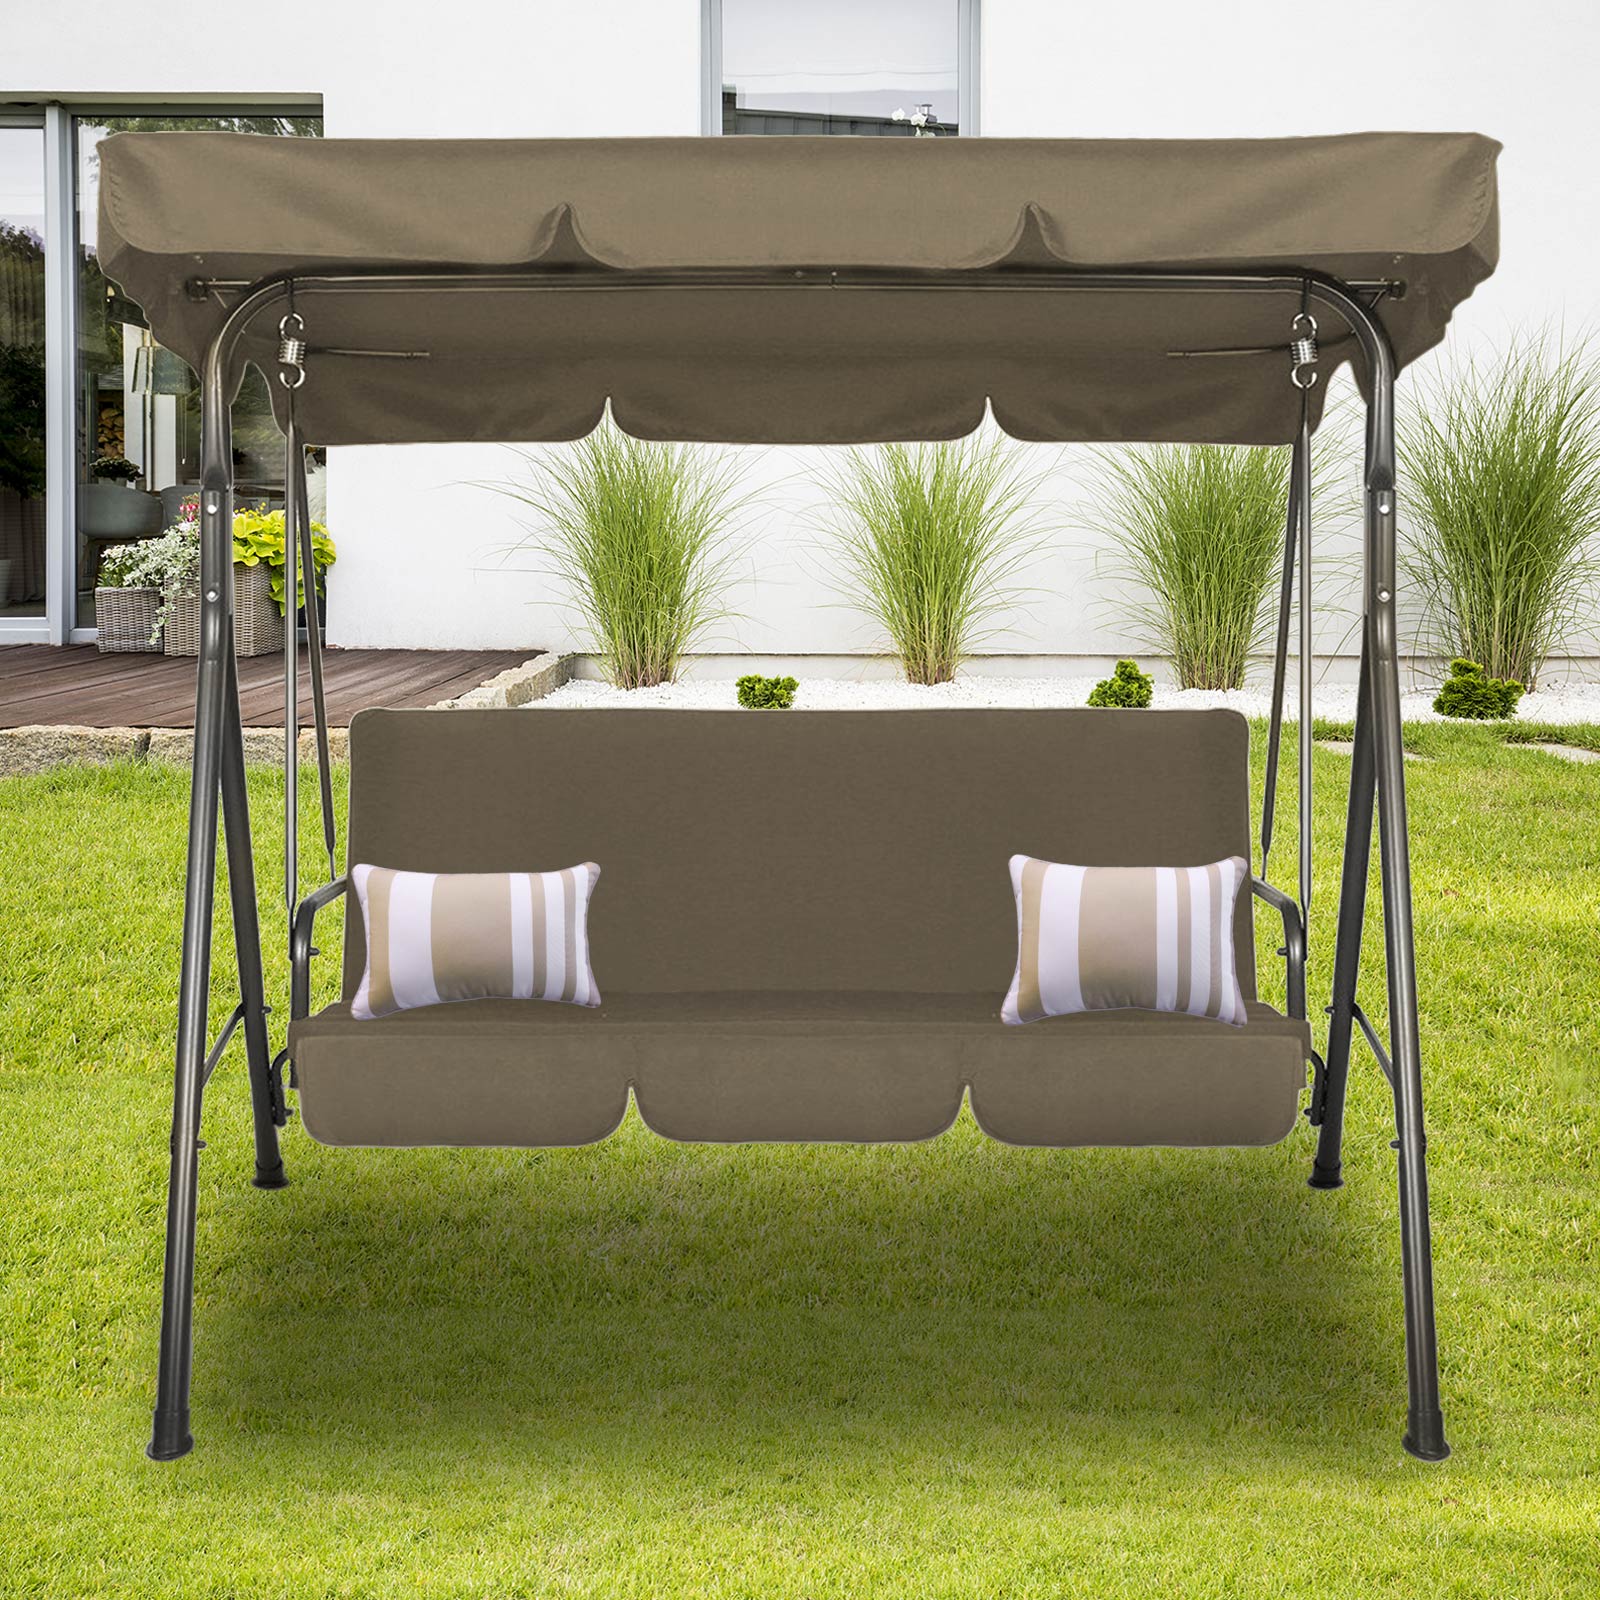 Milano Outdoor Swing Bench Seat Chair Canopy Furniture 3 Seater Garden Hammock - Coffee - image2